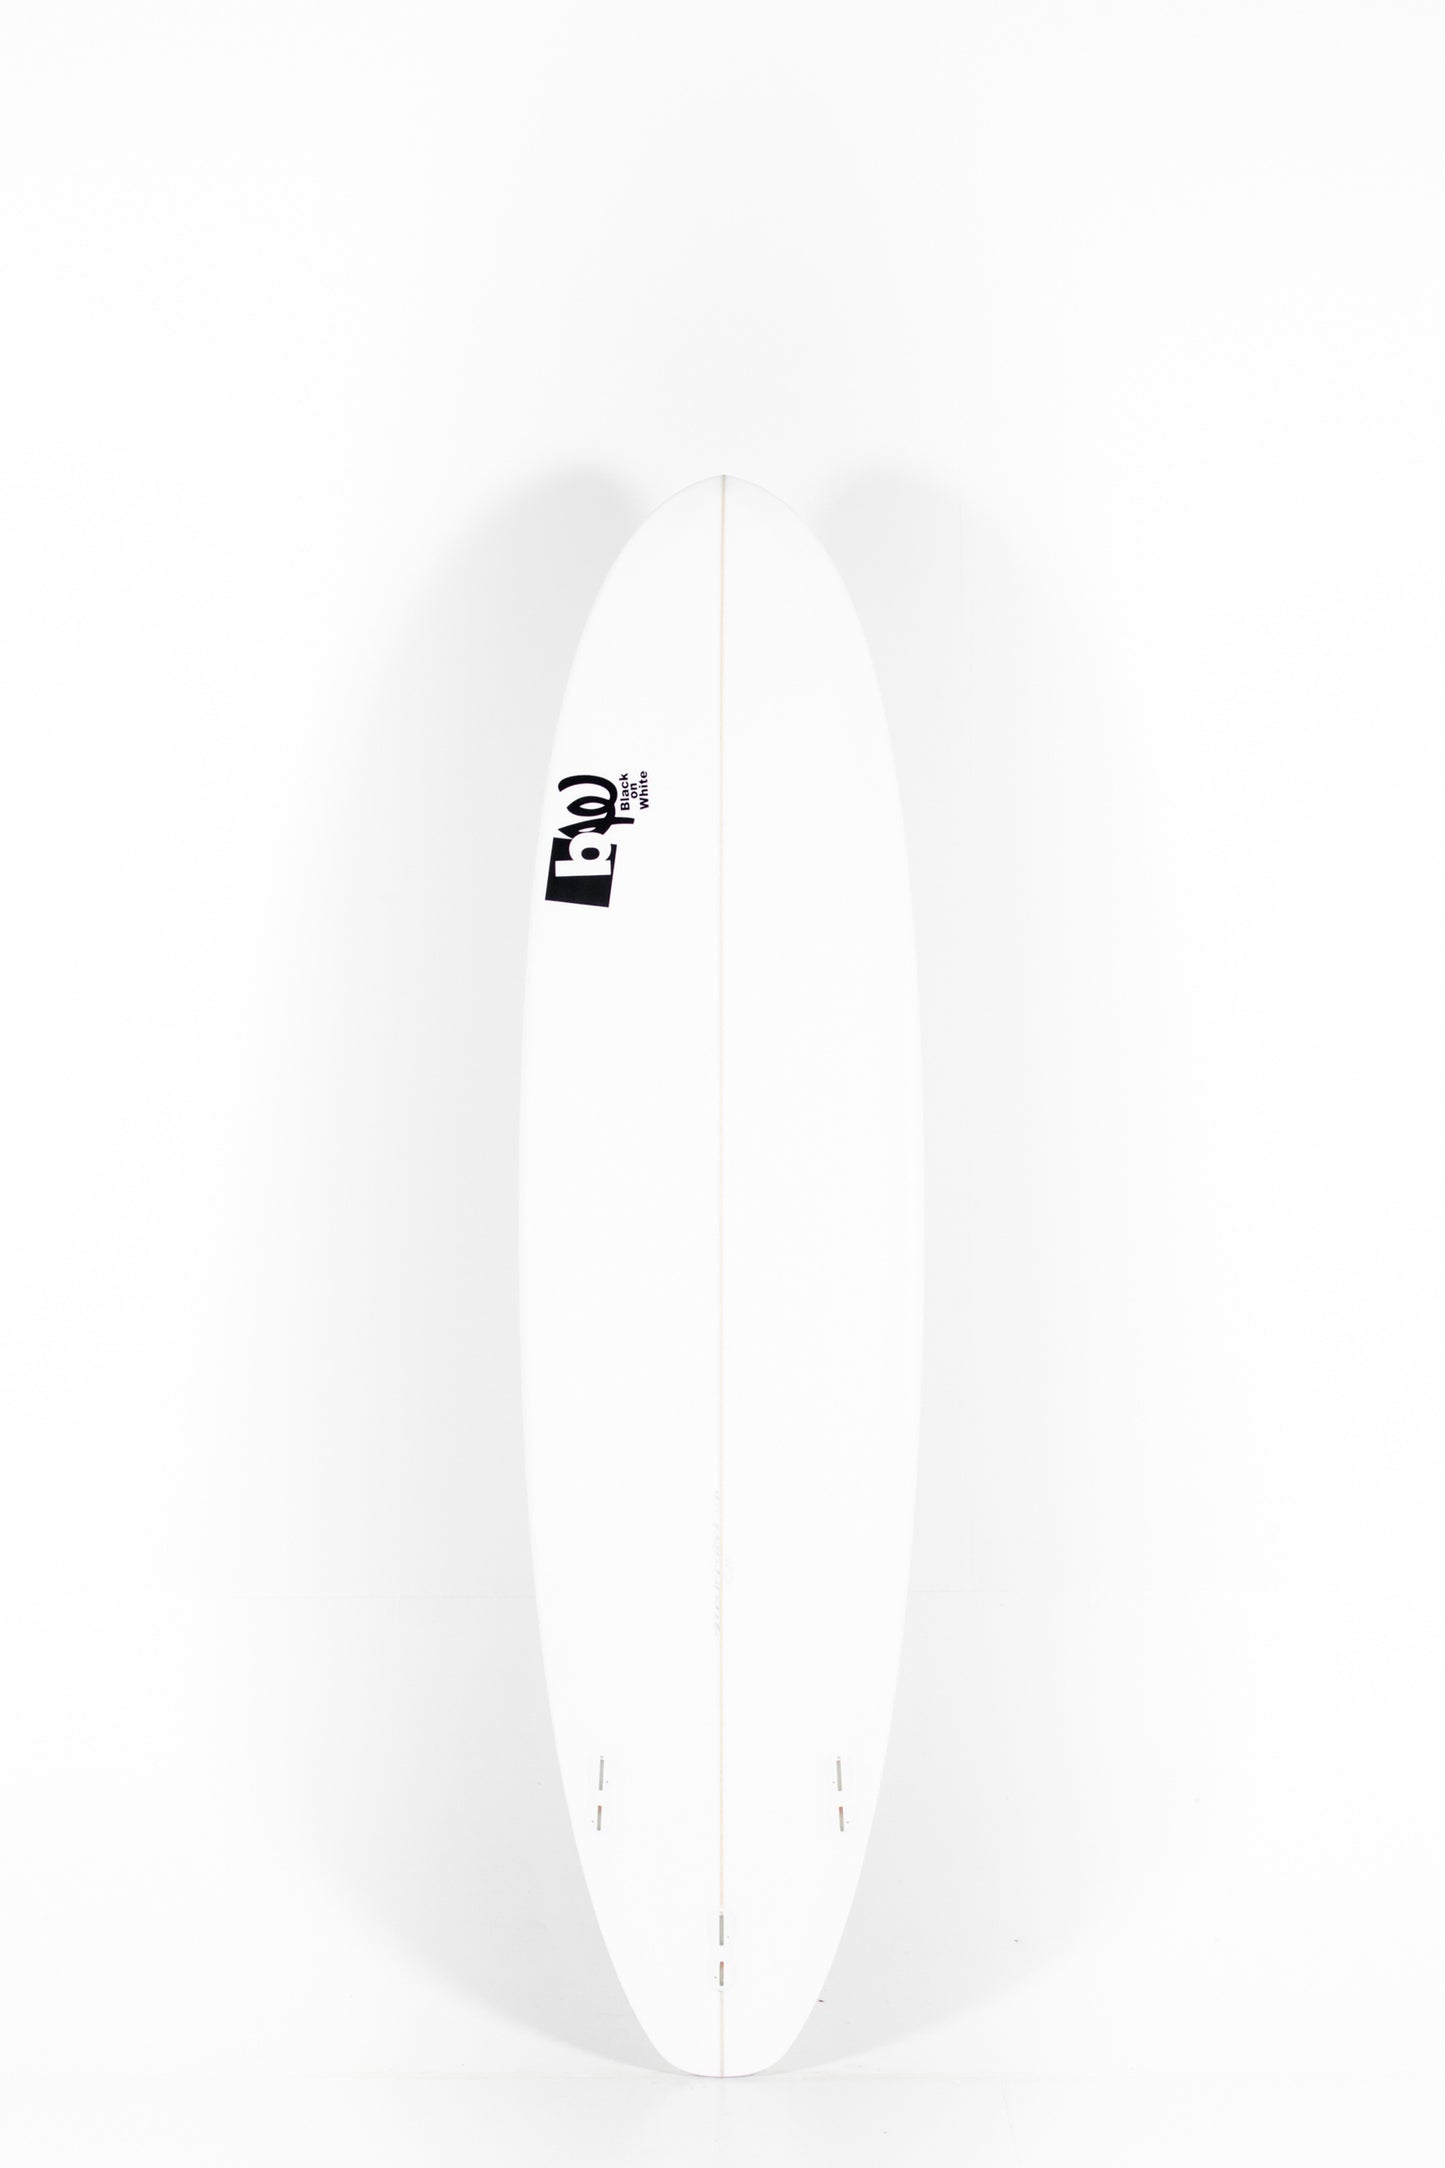 BW SURFBOARDS - BW SURFBOARDS Evolutivo 7'2" x 21 1/2 x 2 3/4 x 51.7L. at PUKAS SURF SHOP